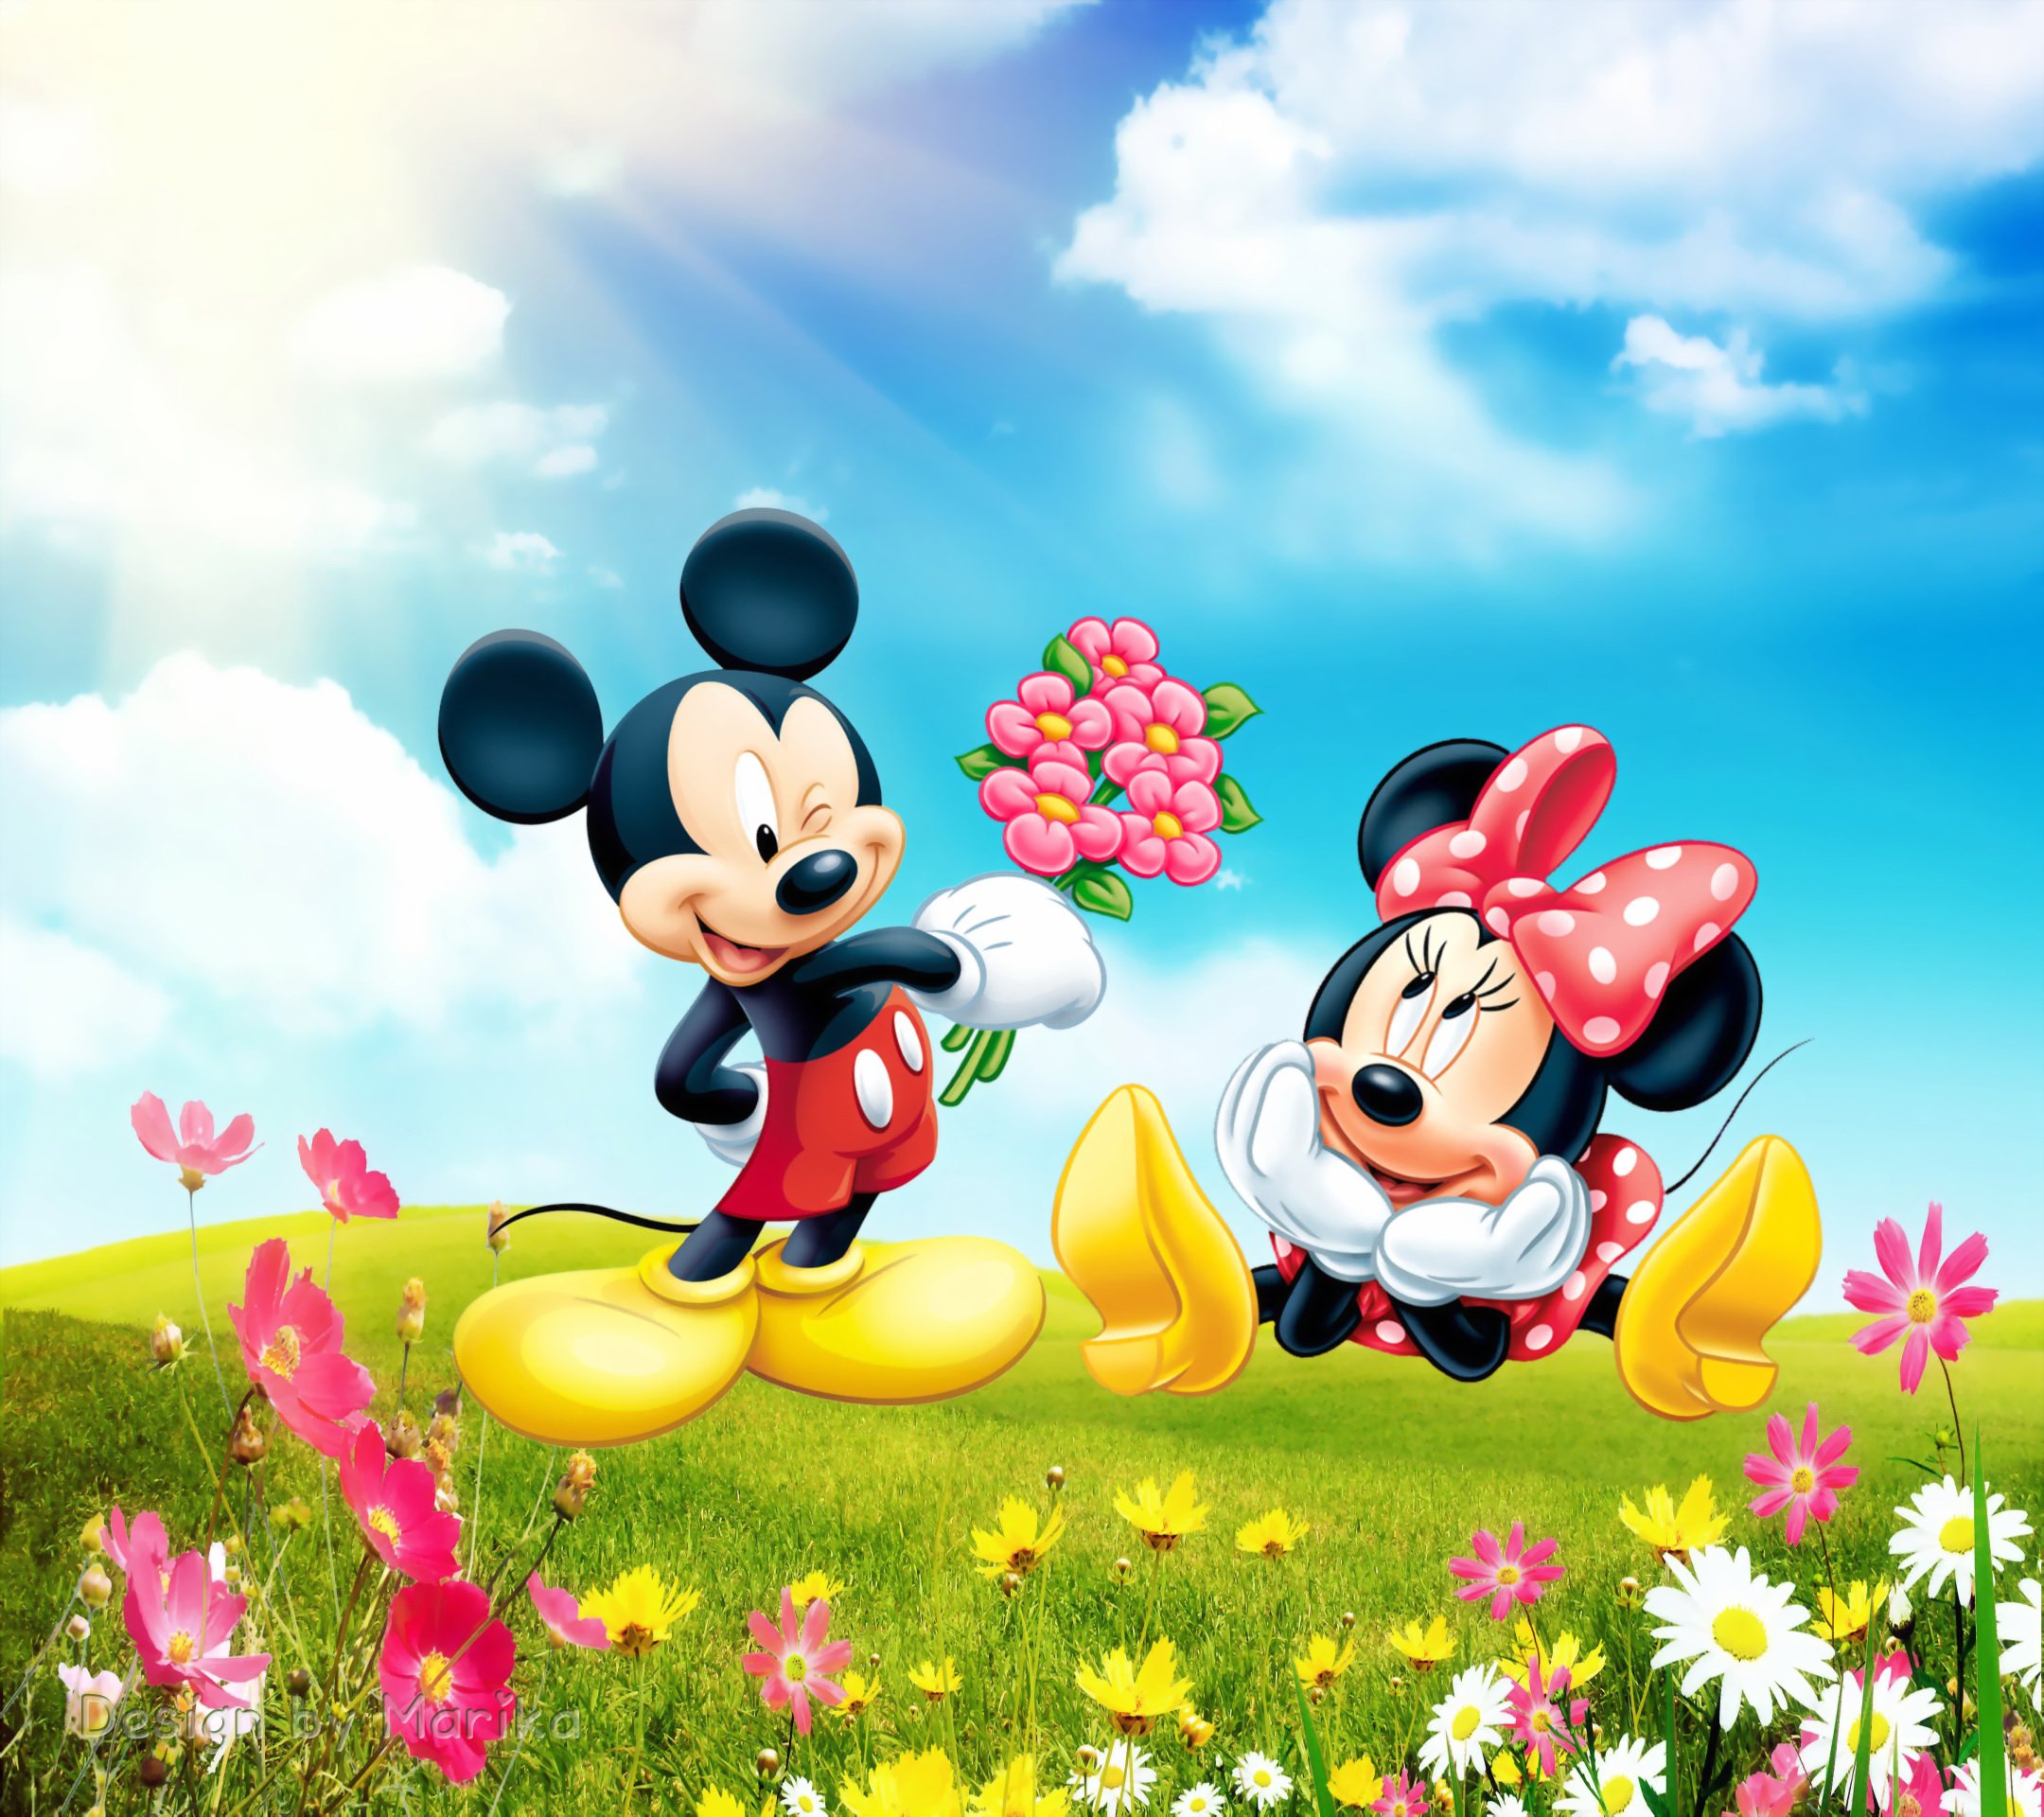 disney mickey mouse and minnie mouse image on We Heart It  Mickey mouse  wallpaper Minnie mouse images Mickey mouse wallpaper iphone